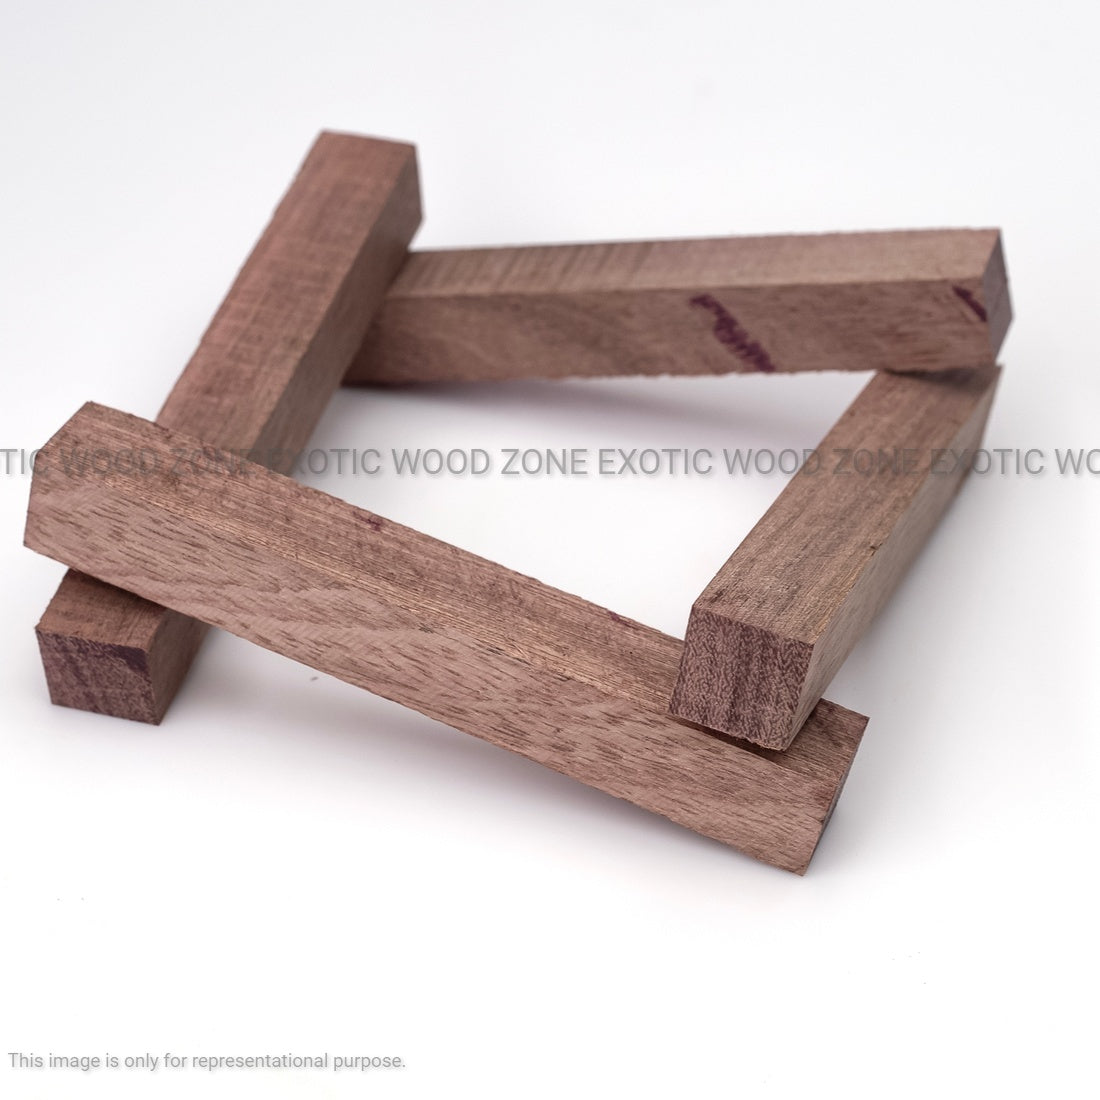 Pack Of 100, Purple Heart Wood Pen Blanks 3/4&quot; x 3/4&quot; x 6&quot; - Exotic Wood Zone - Buy online Across USA 